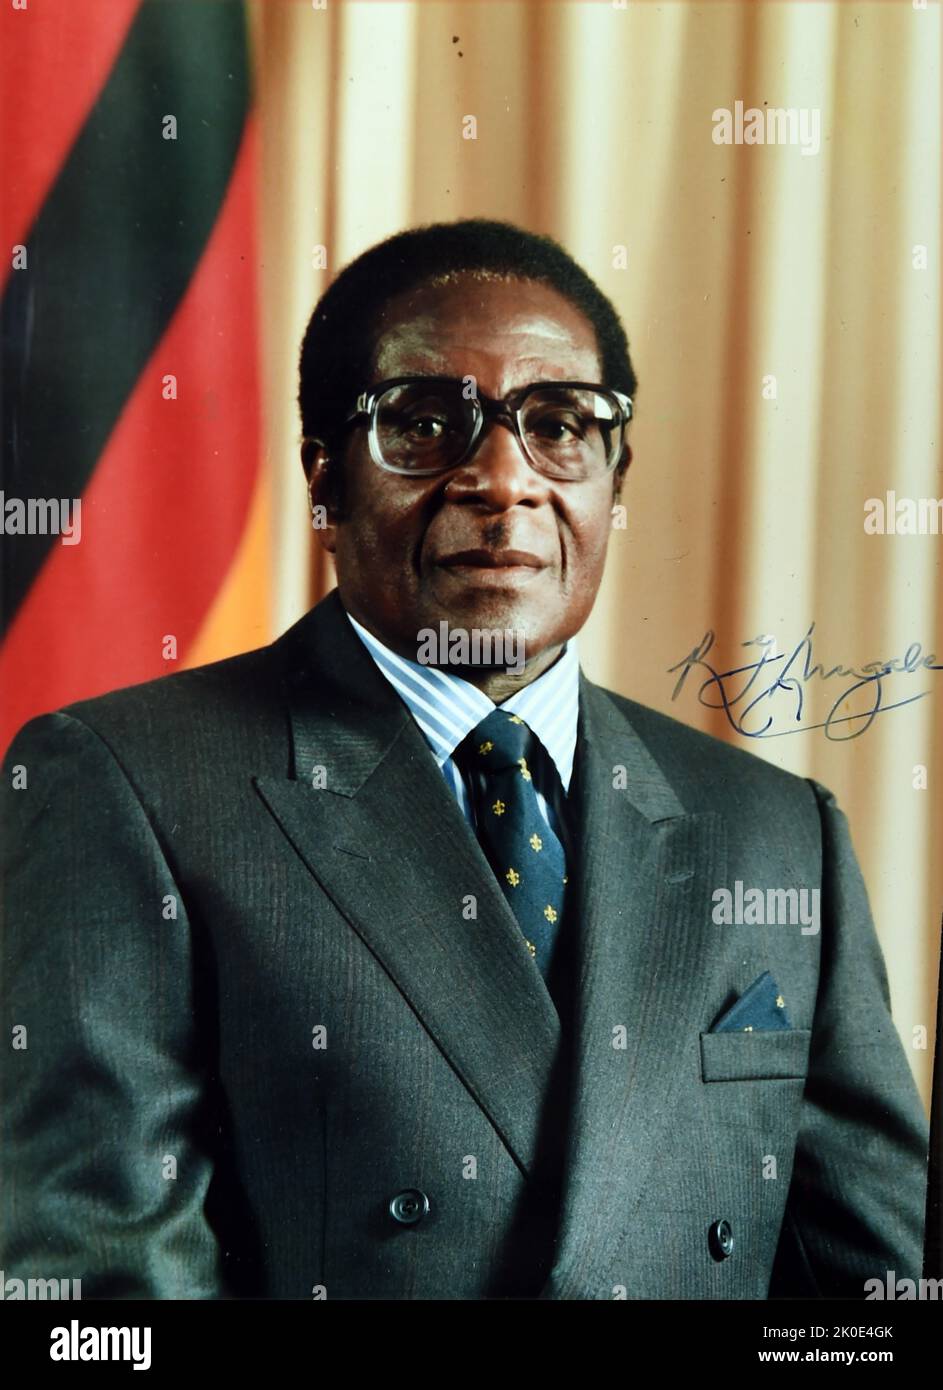 Signed photographs of Robert Mugabe (1924 - 2019) Zimbabwean revolutionary and politician who served as Prime Minister of Zimbabwe from 1980 to 1987 and then as President from 1987 to 2017. Stock Photo